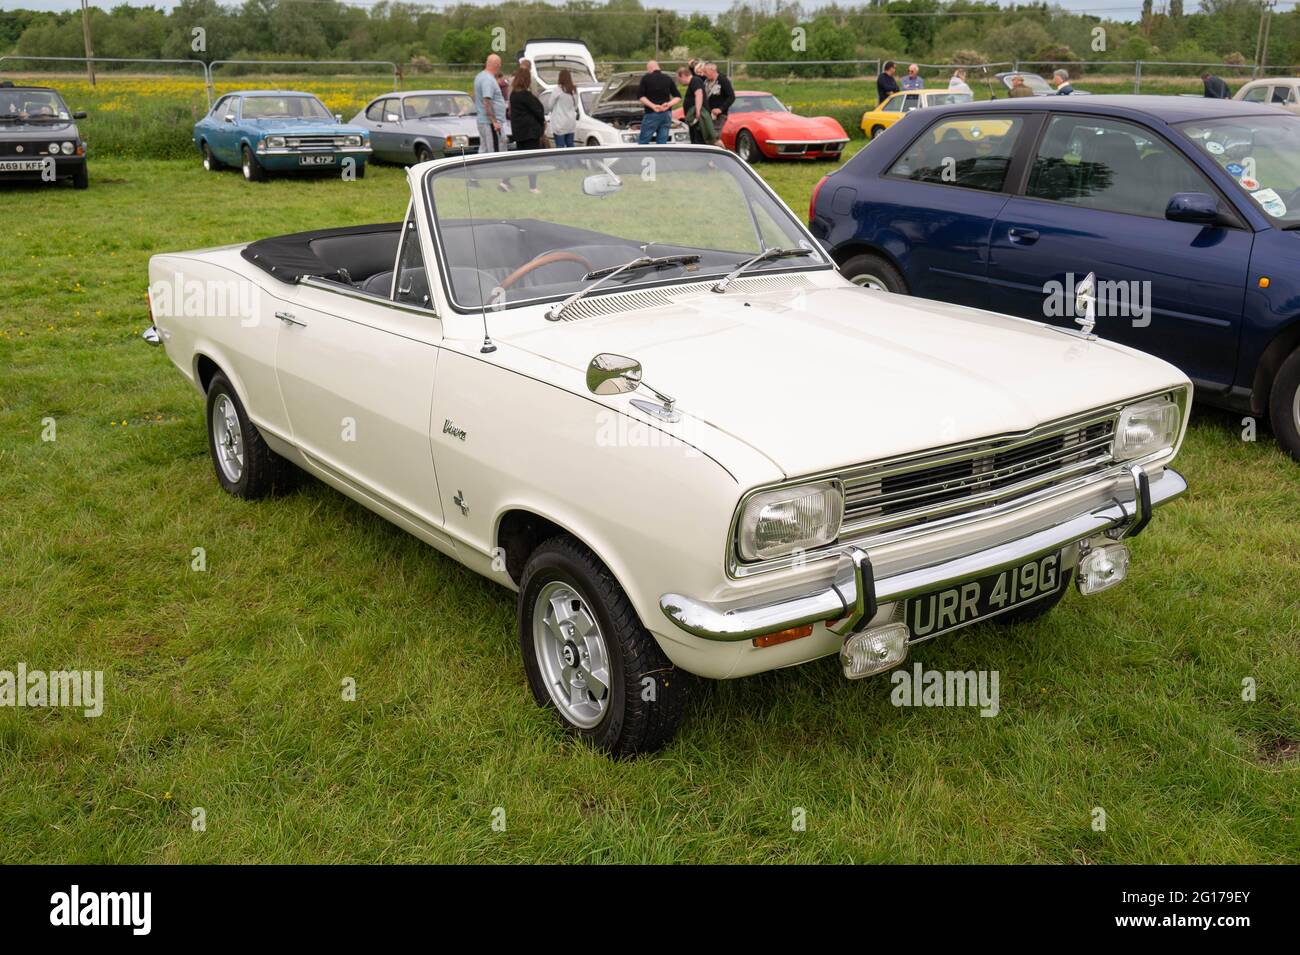 A very rare 1 of 5 Vauxhall Viva HB SL90 convertible at a classic car rally Stock Photo